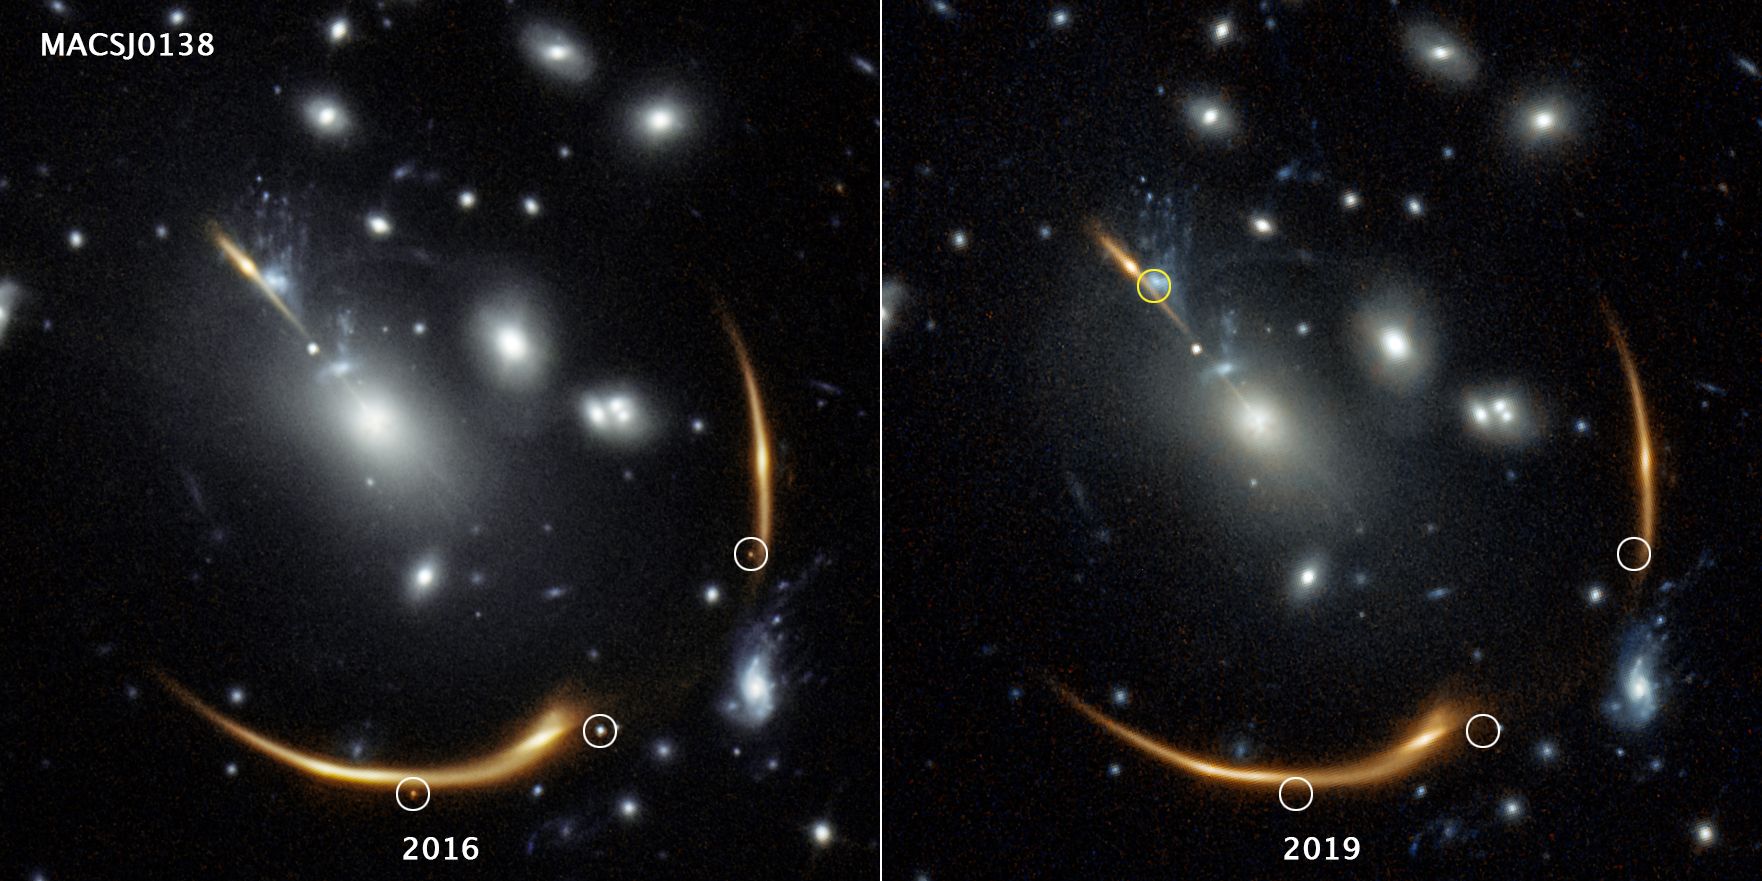 Images of the Requiem supernova, captured in 2016 and 2019